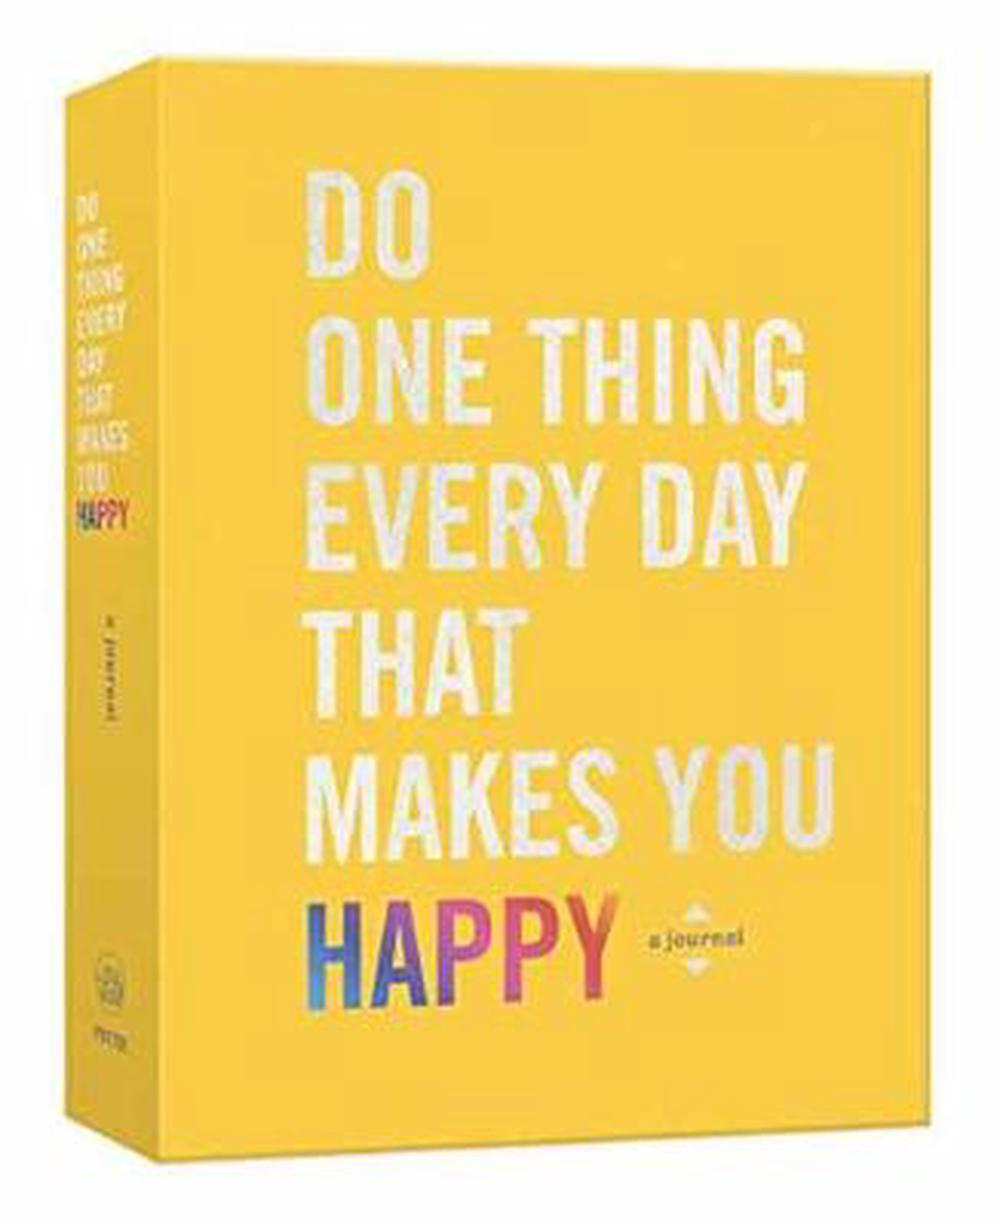 Do One Thing That Makes You Happy